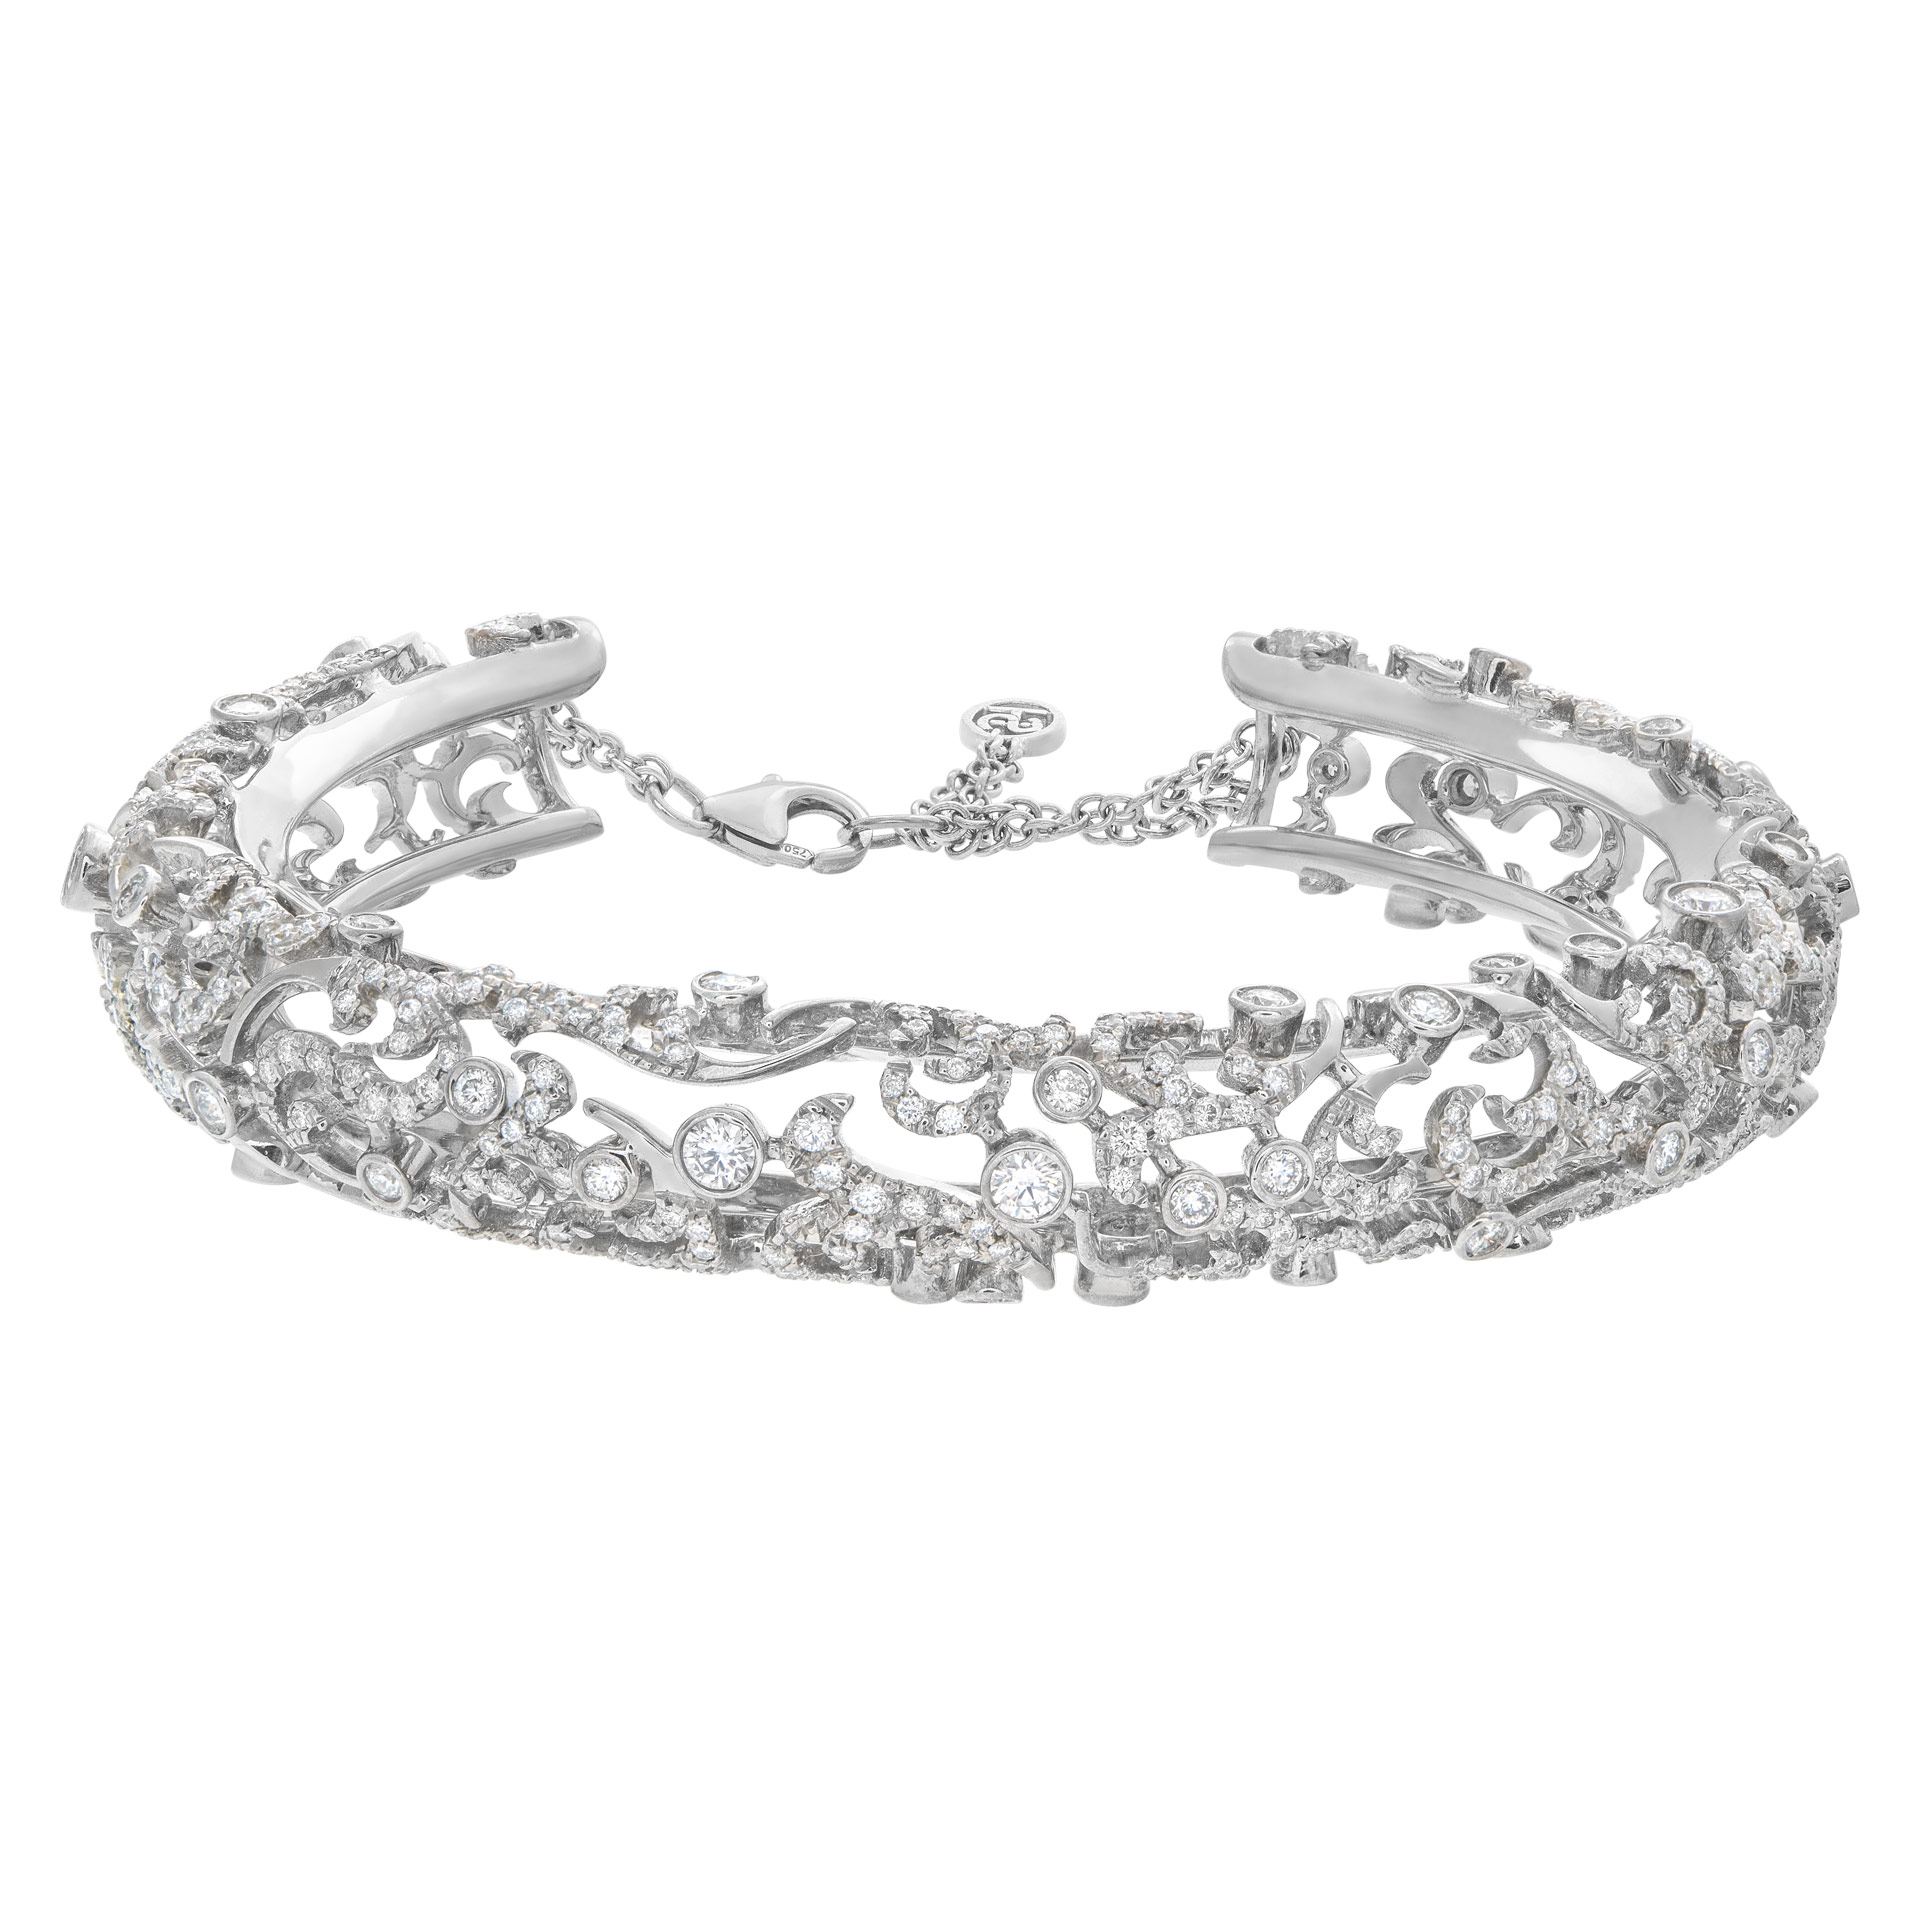 Remarkable diamond bangle in 18k white gold with 4.13 carats in diamonds